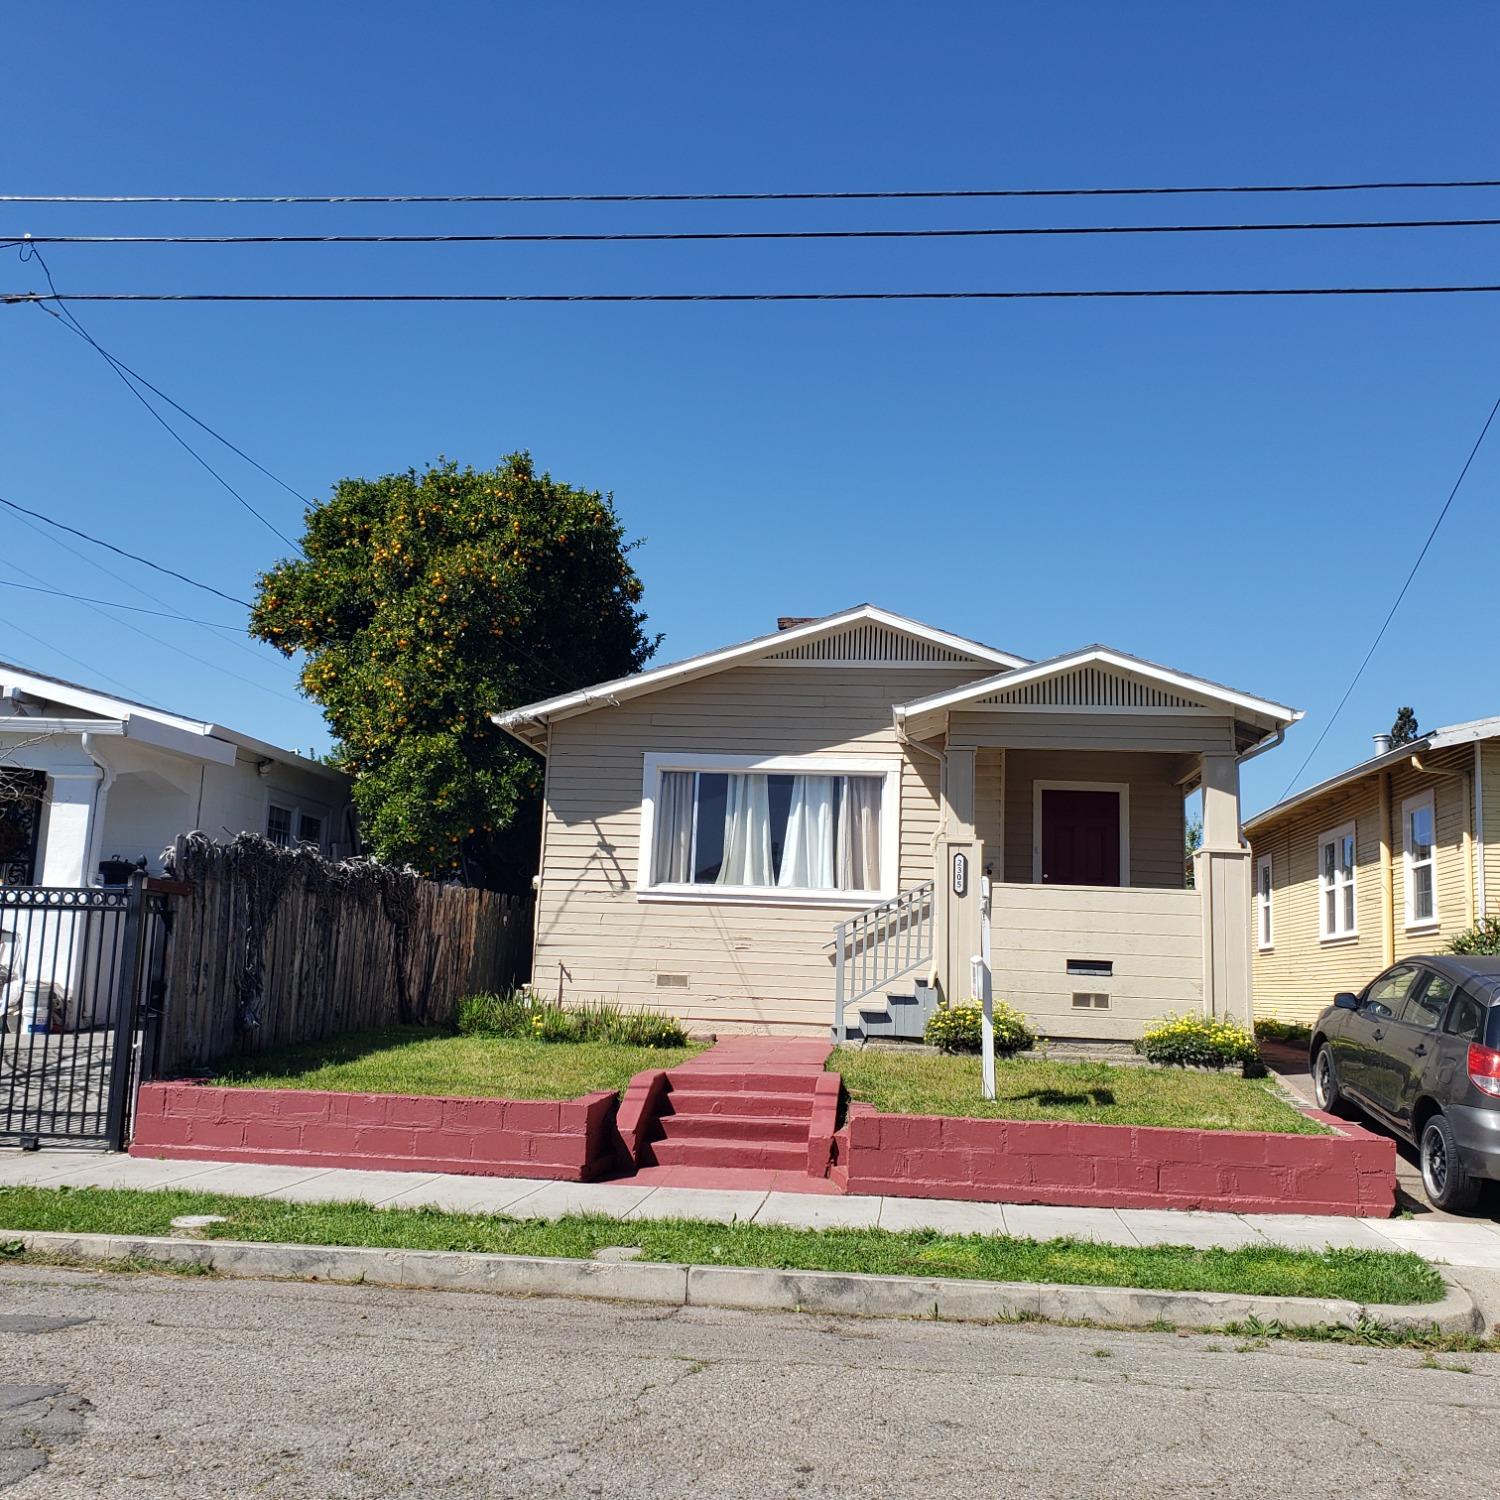 Photo of 2305 Auseon Ave in Oakland, CA